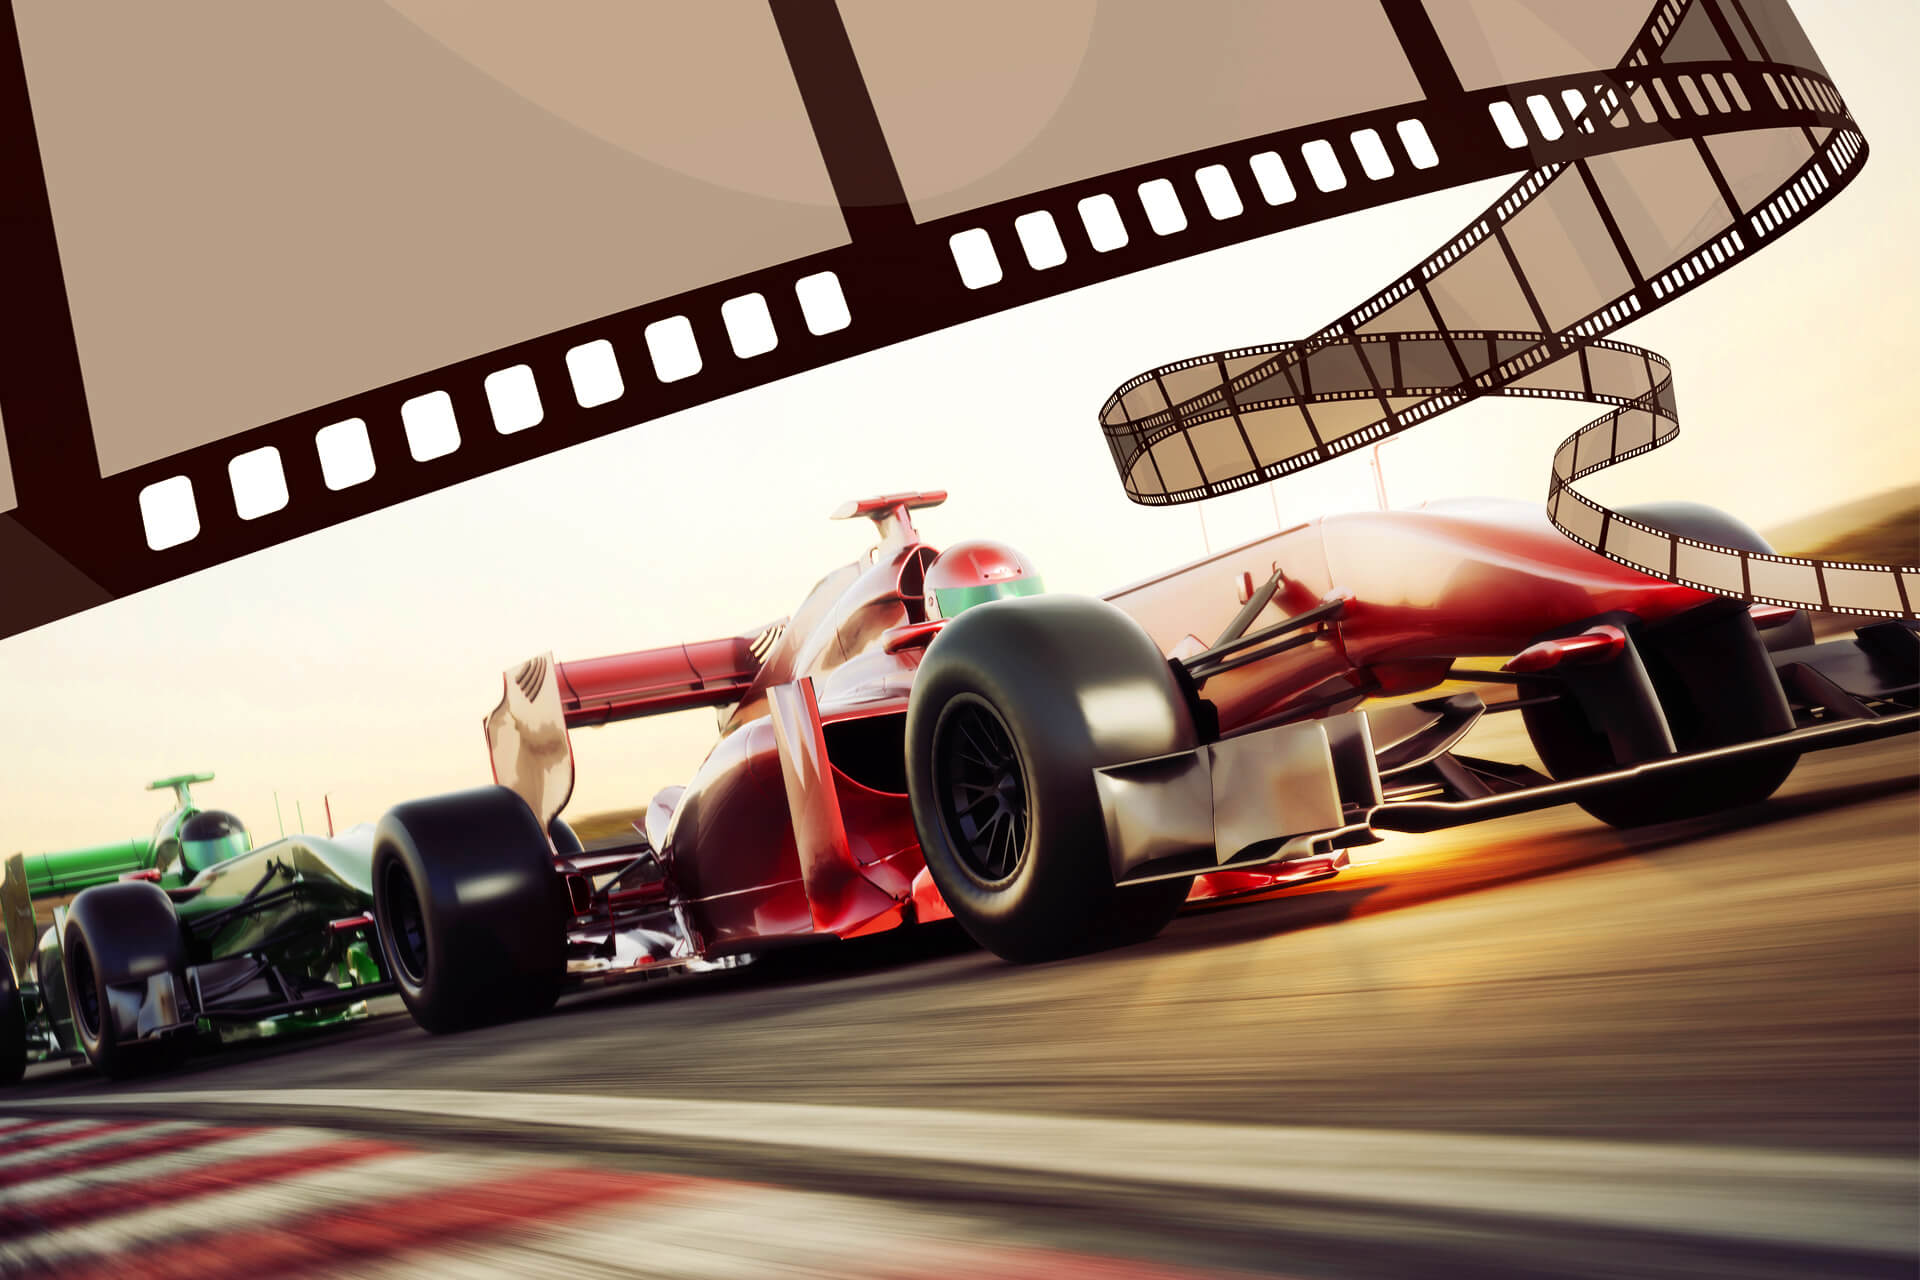 AUTOAPP FAVOURITES: The best racing films to get you through the COVID-19 Circuit Breaker